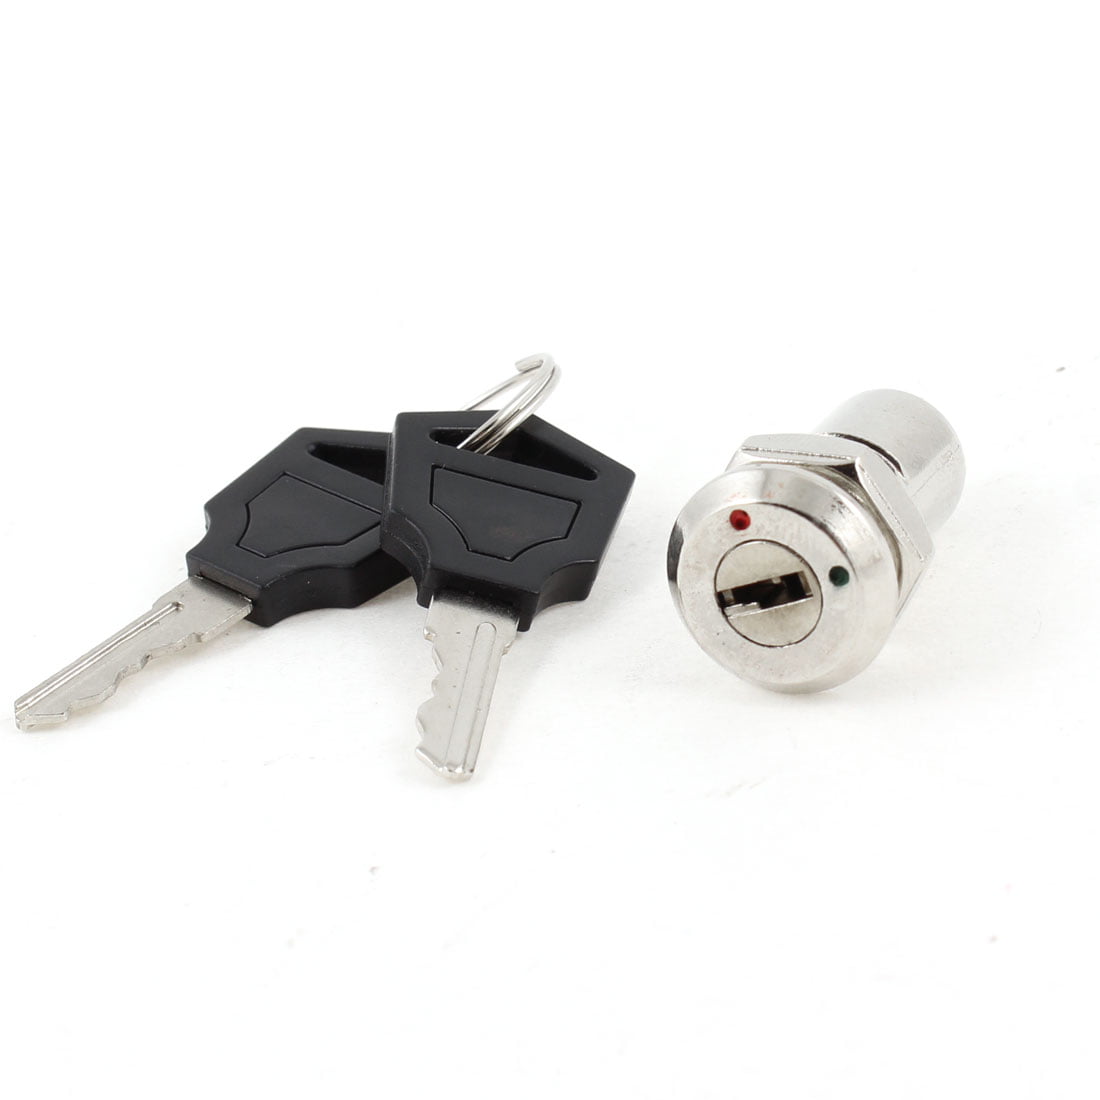 22mm On/Off Key Switch Security Lock Heavy Duty Keyed 2 Position 3 Position 10A 